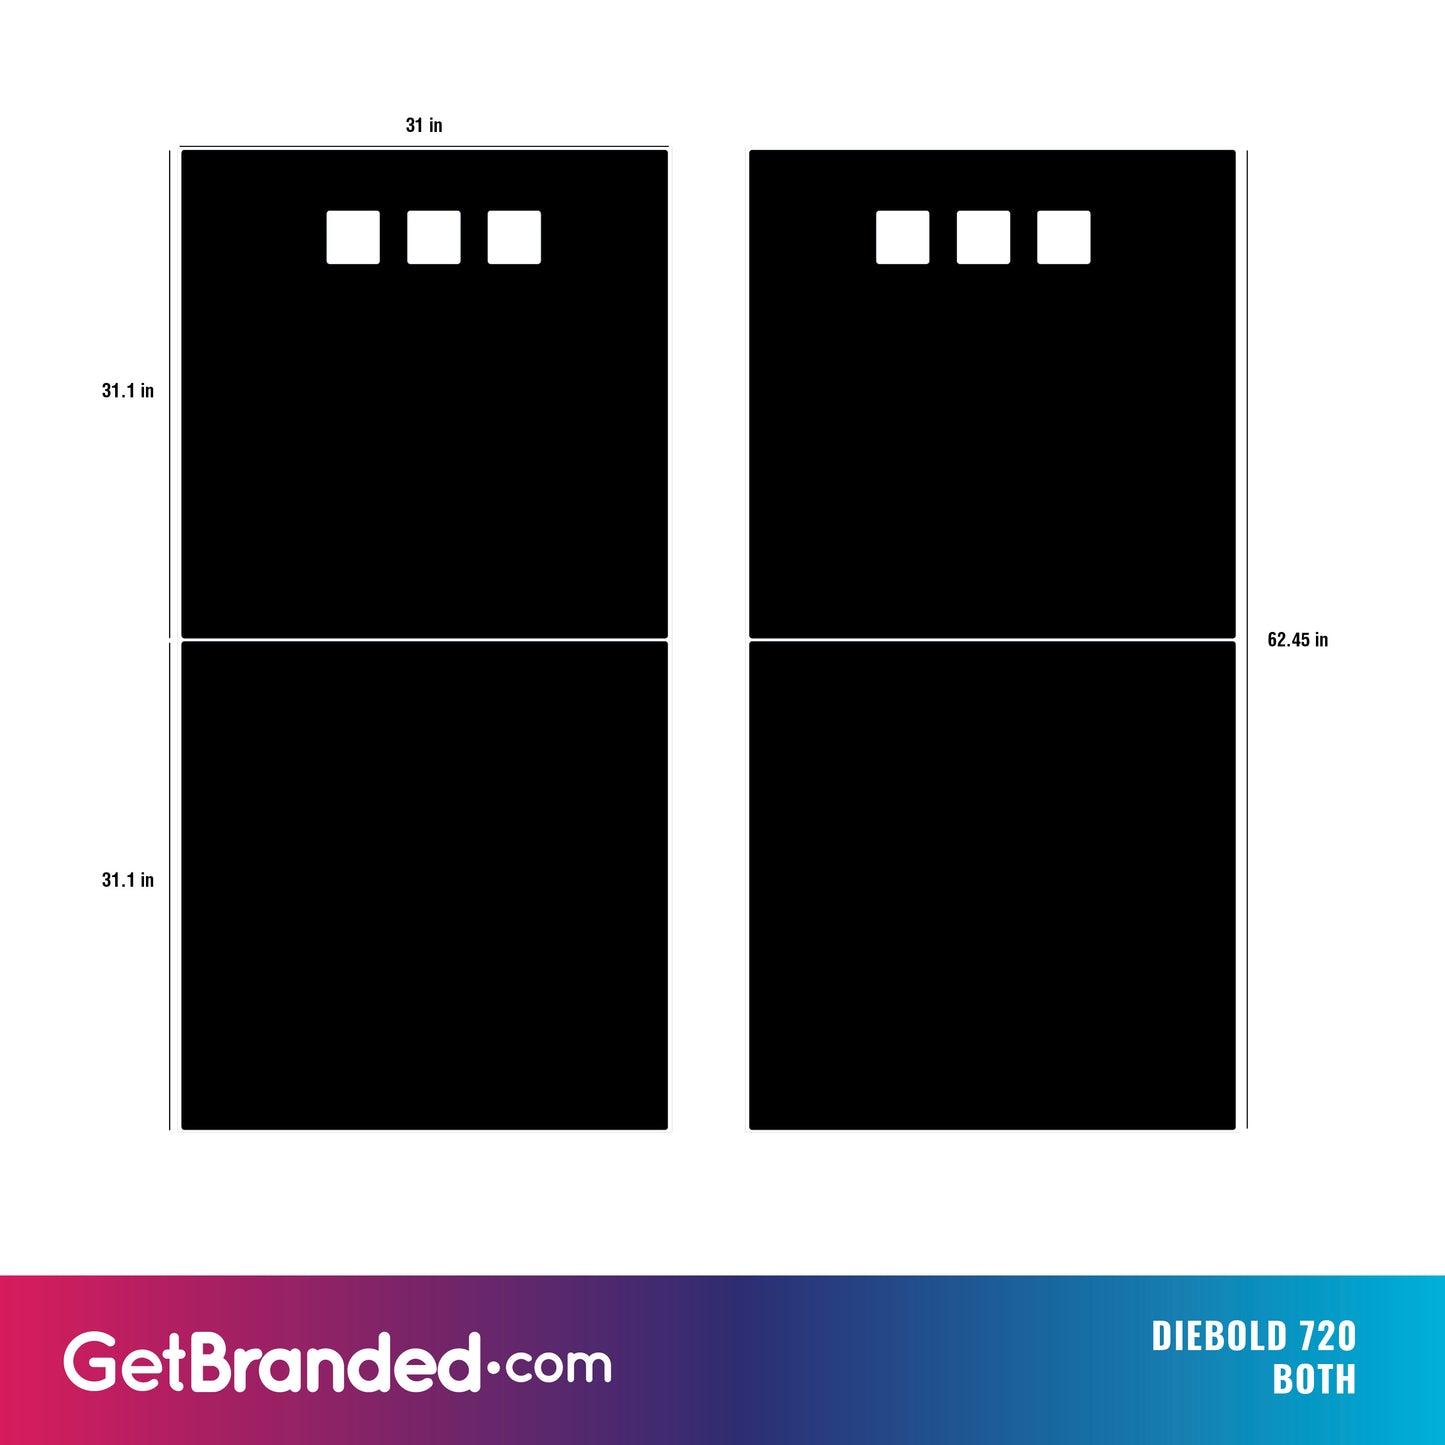 Diebold 720 both side panels dimensions